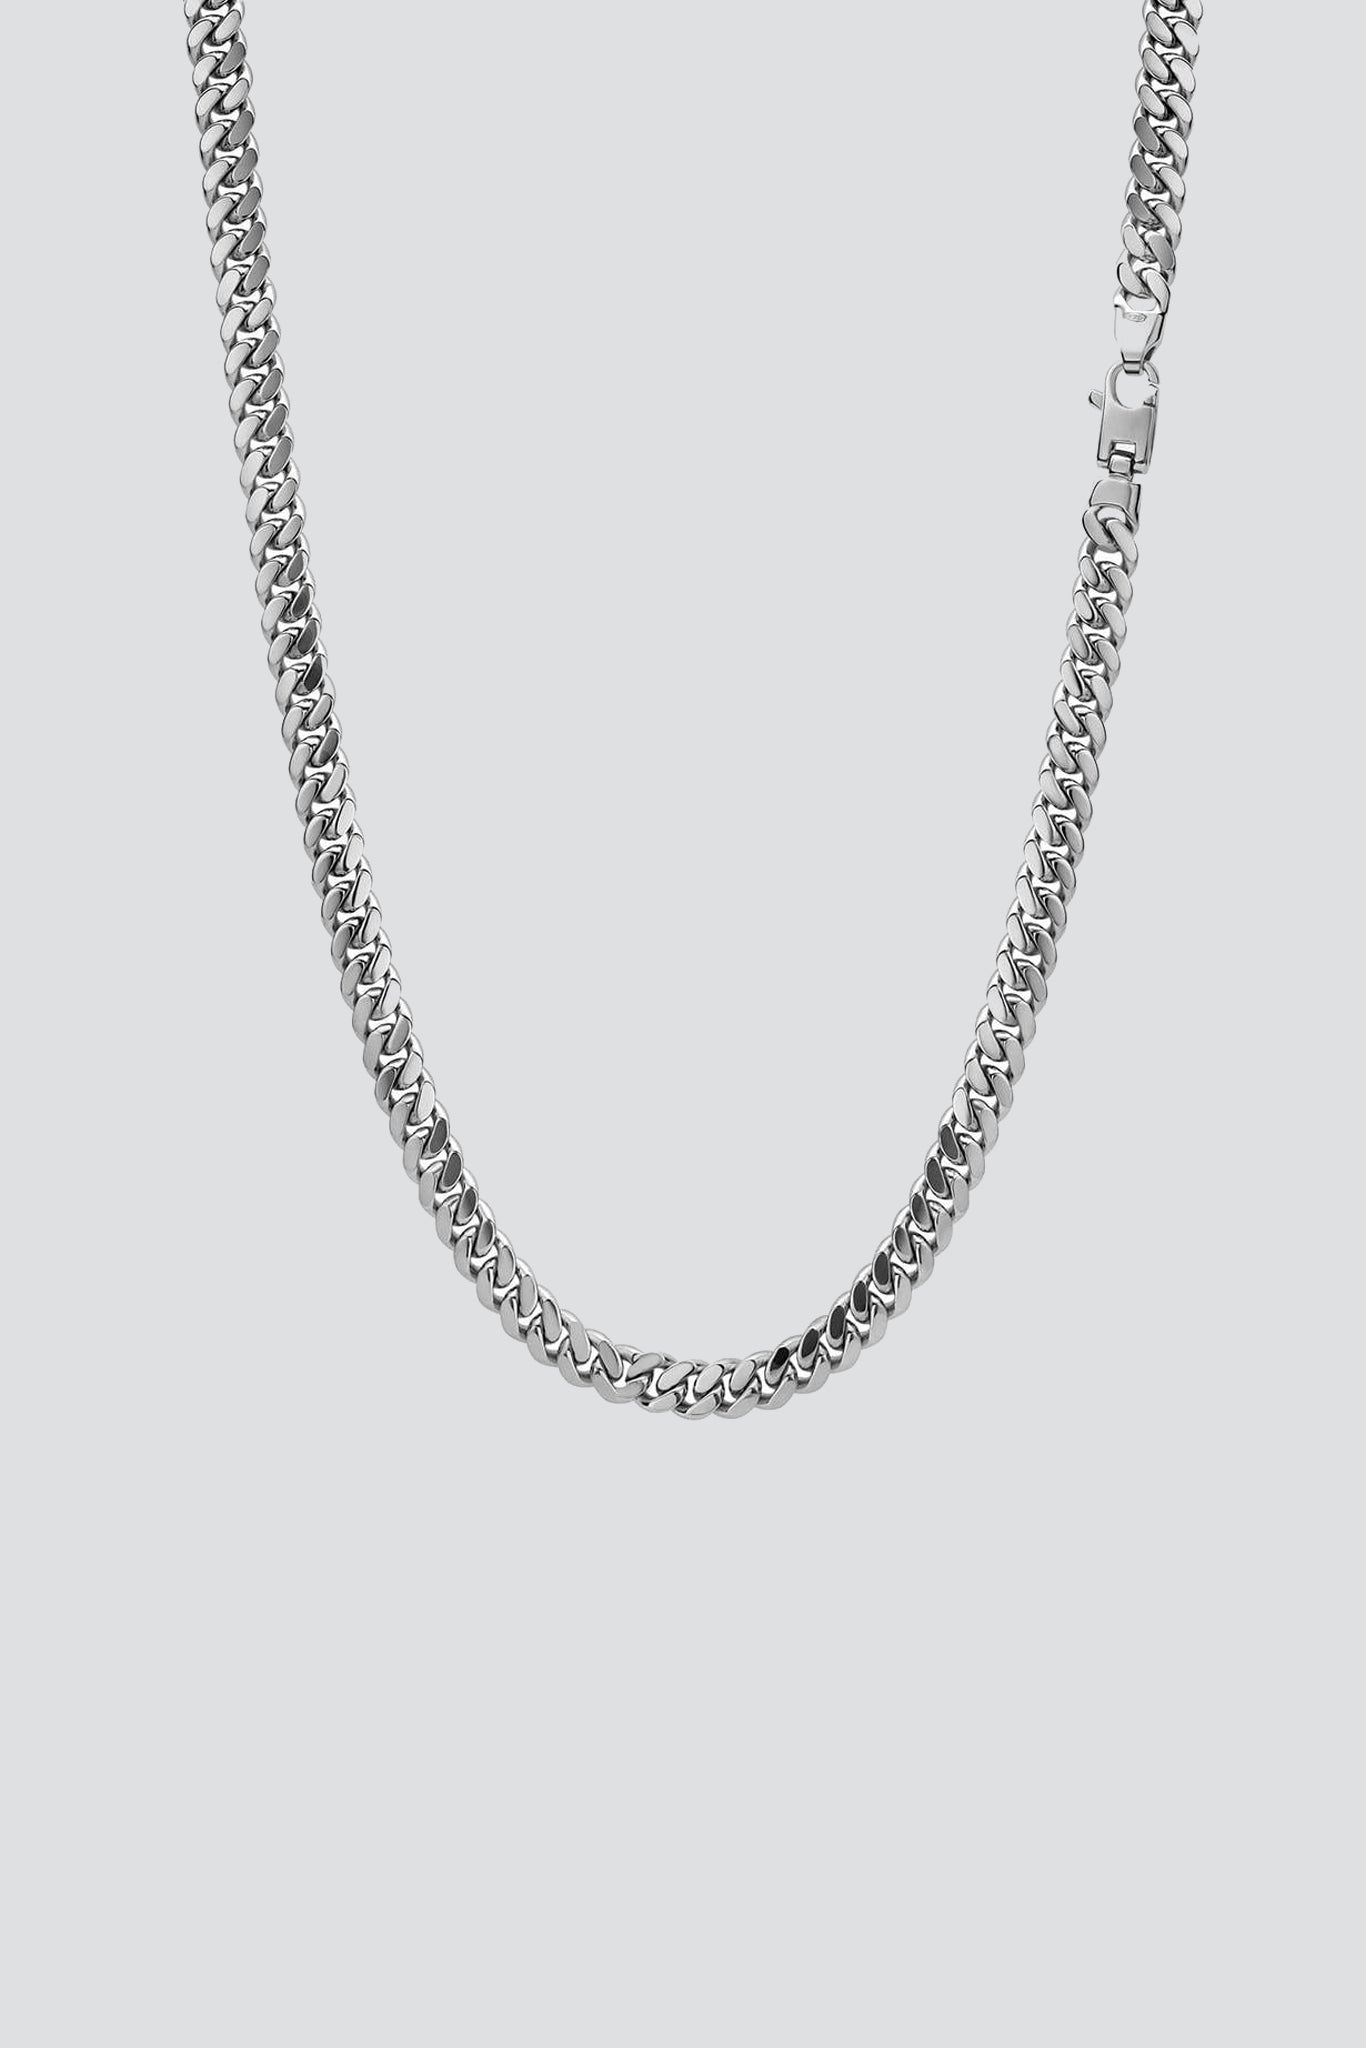 Sterling Silver 6.5mm Cuban Chain Necklace